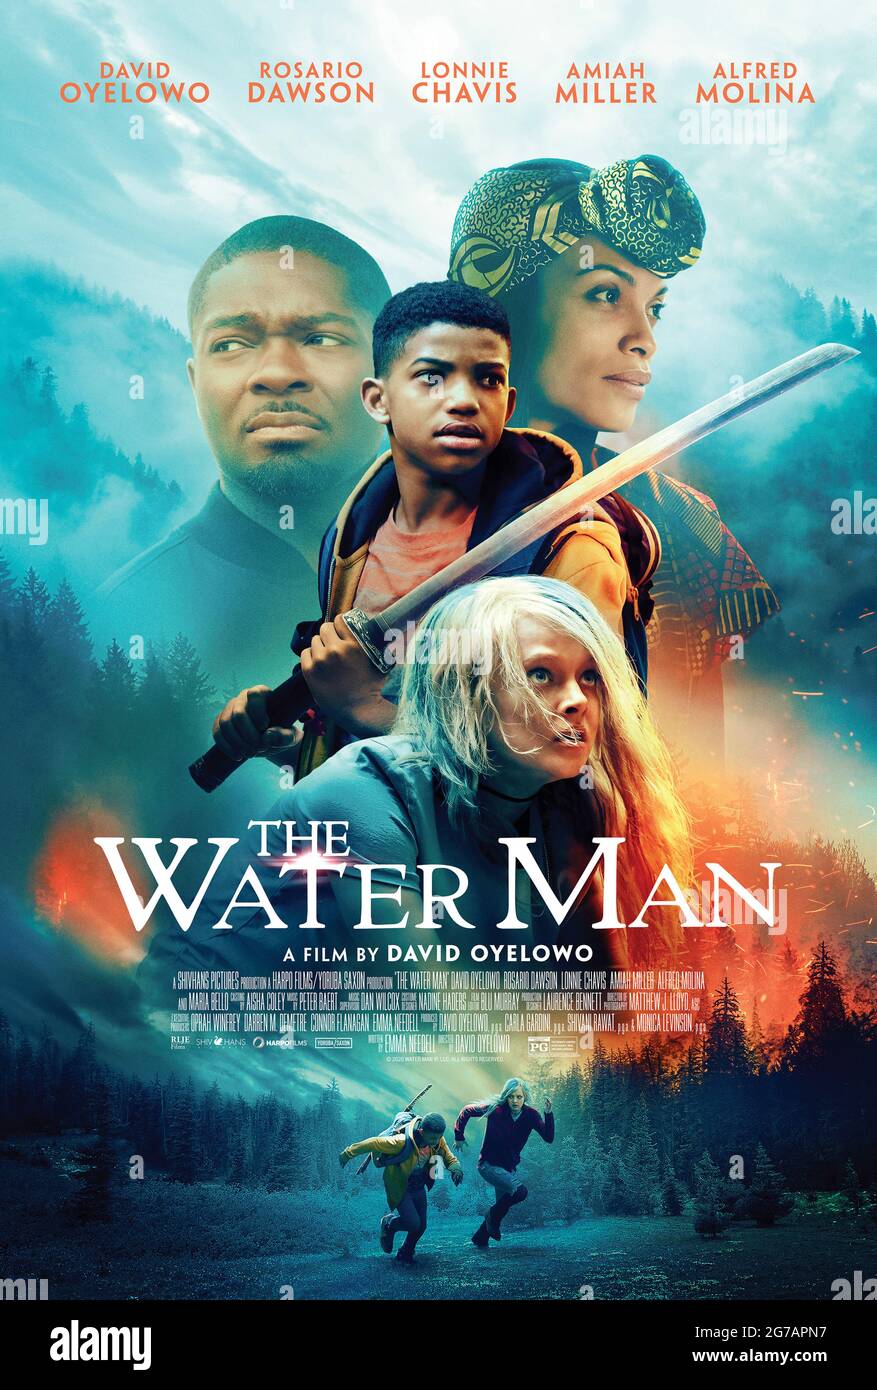 The Water Man (2020) directed by David Oyelowo and starring Rosario Dawson, Maria Bello and Alfred Molina. Fantasy about a boy who sets out on a quest to save his ill mother by searching for a mythic figure said to have magical healing powers. Stock Photo